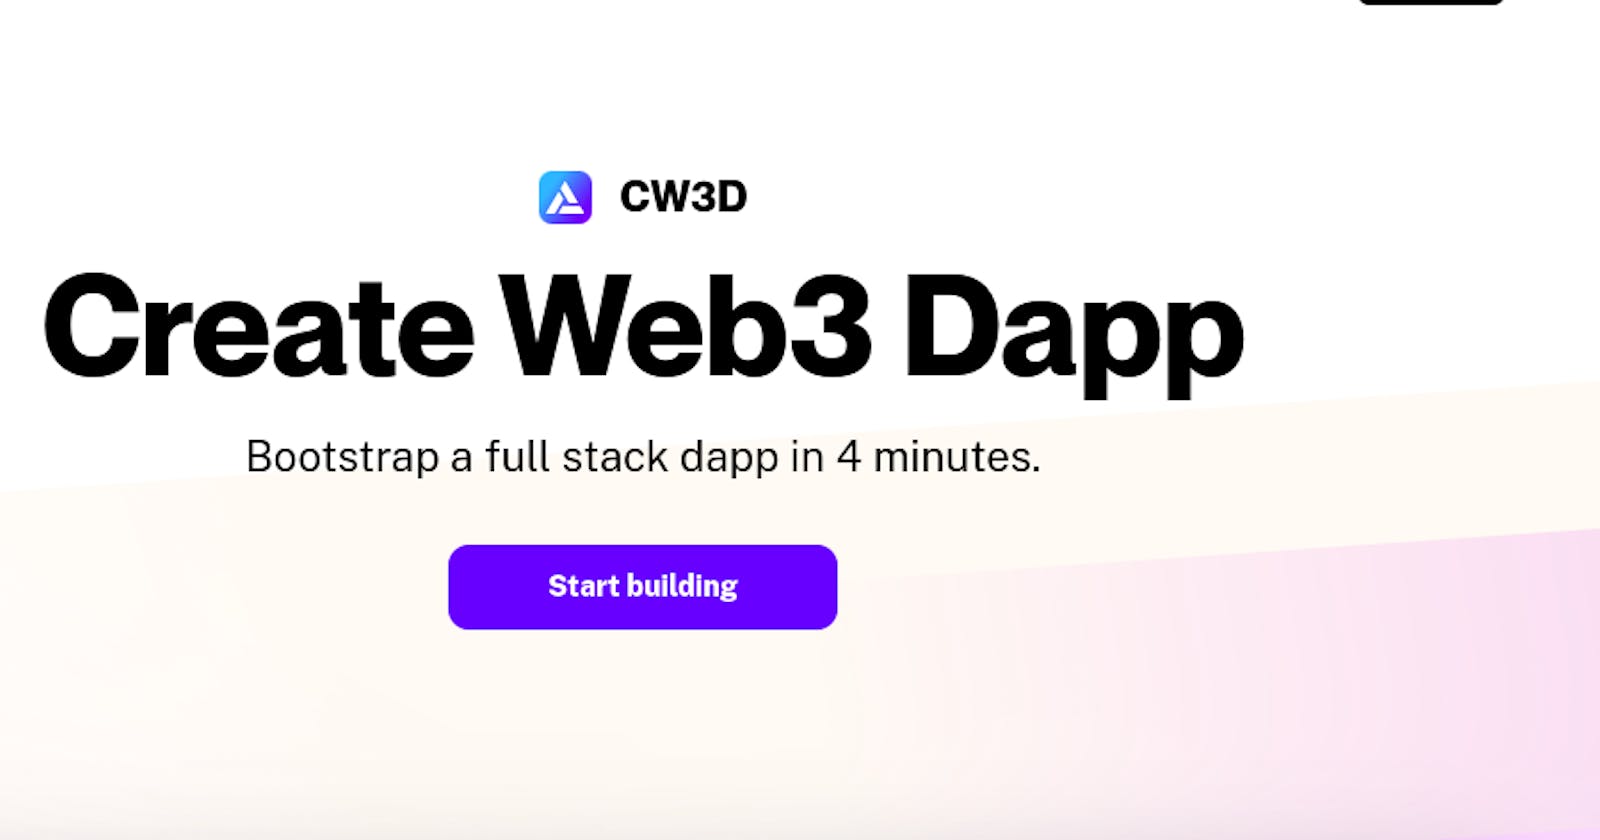 Create-web3-dapp: A Rapid Development Toolkit for Full Stack Web3 Projects